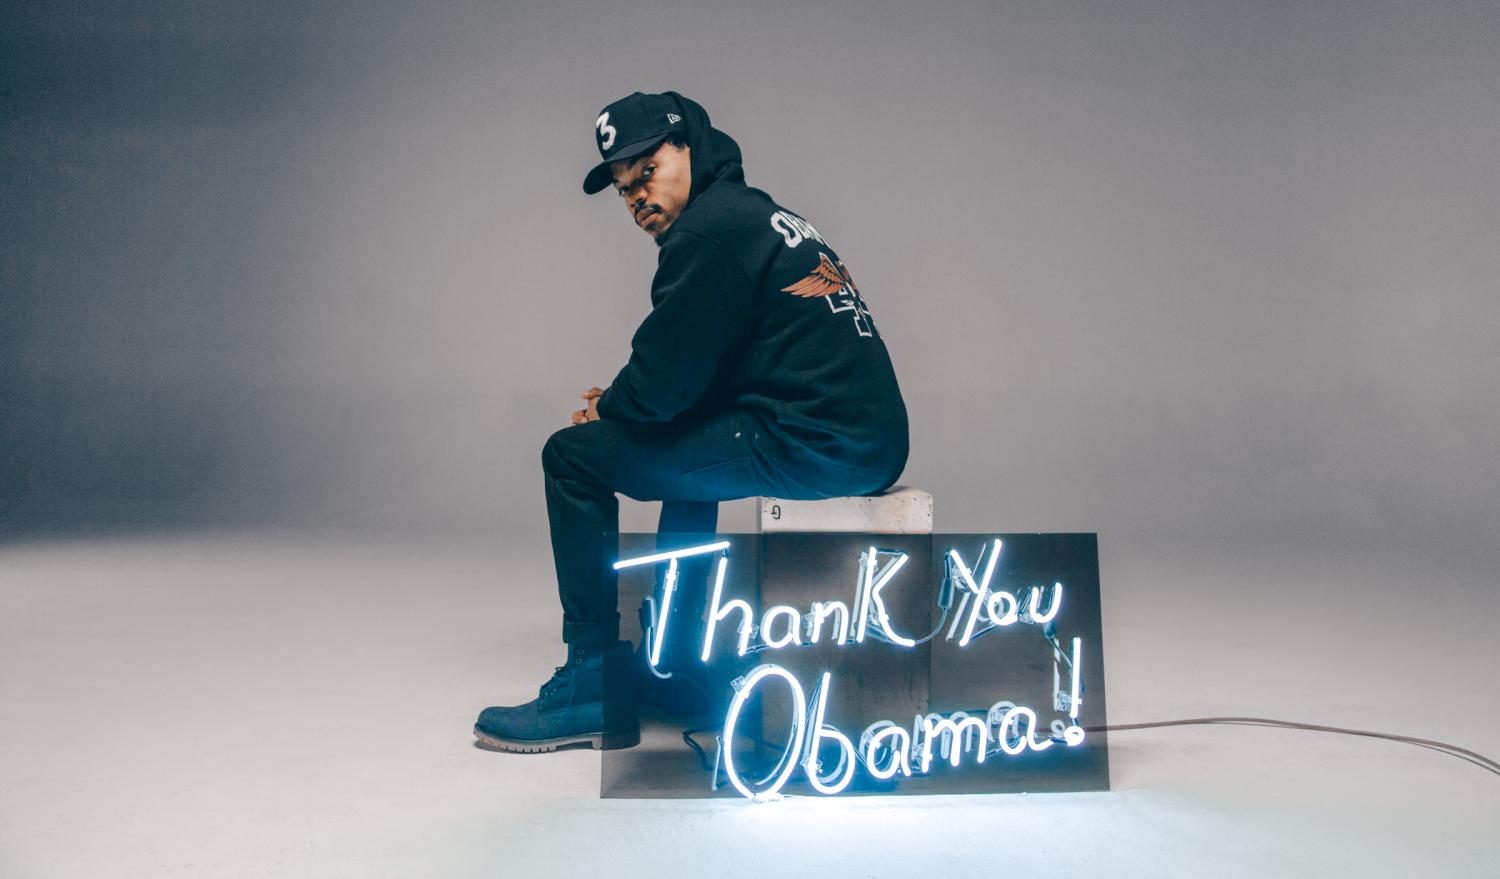 Chance The Rapper models the Thank You Obama line’s “Thank You Hoodie”. (Photo courtesy of Nolis Anderson)